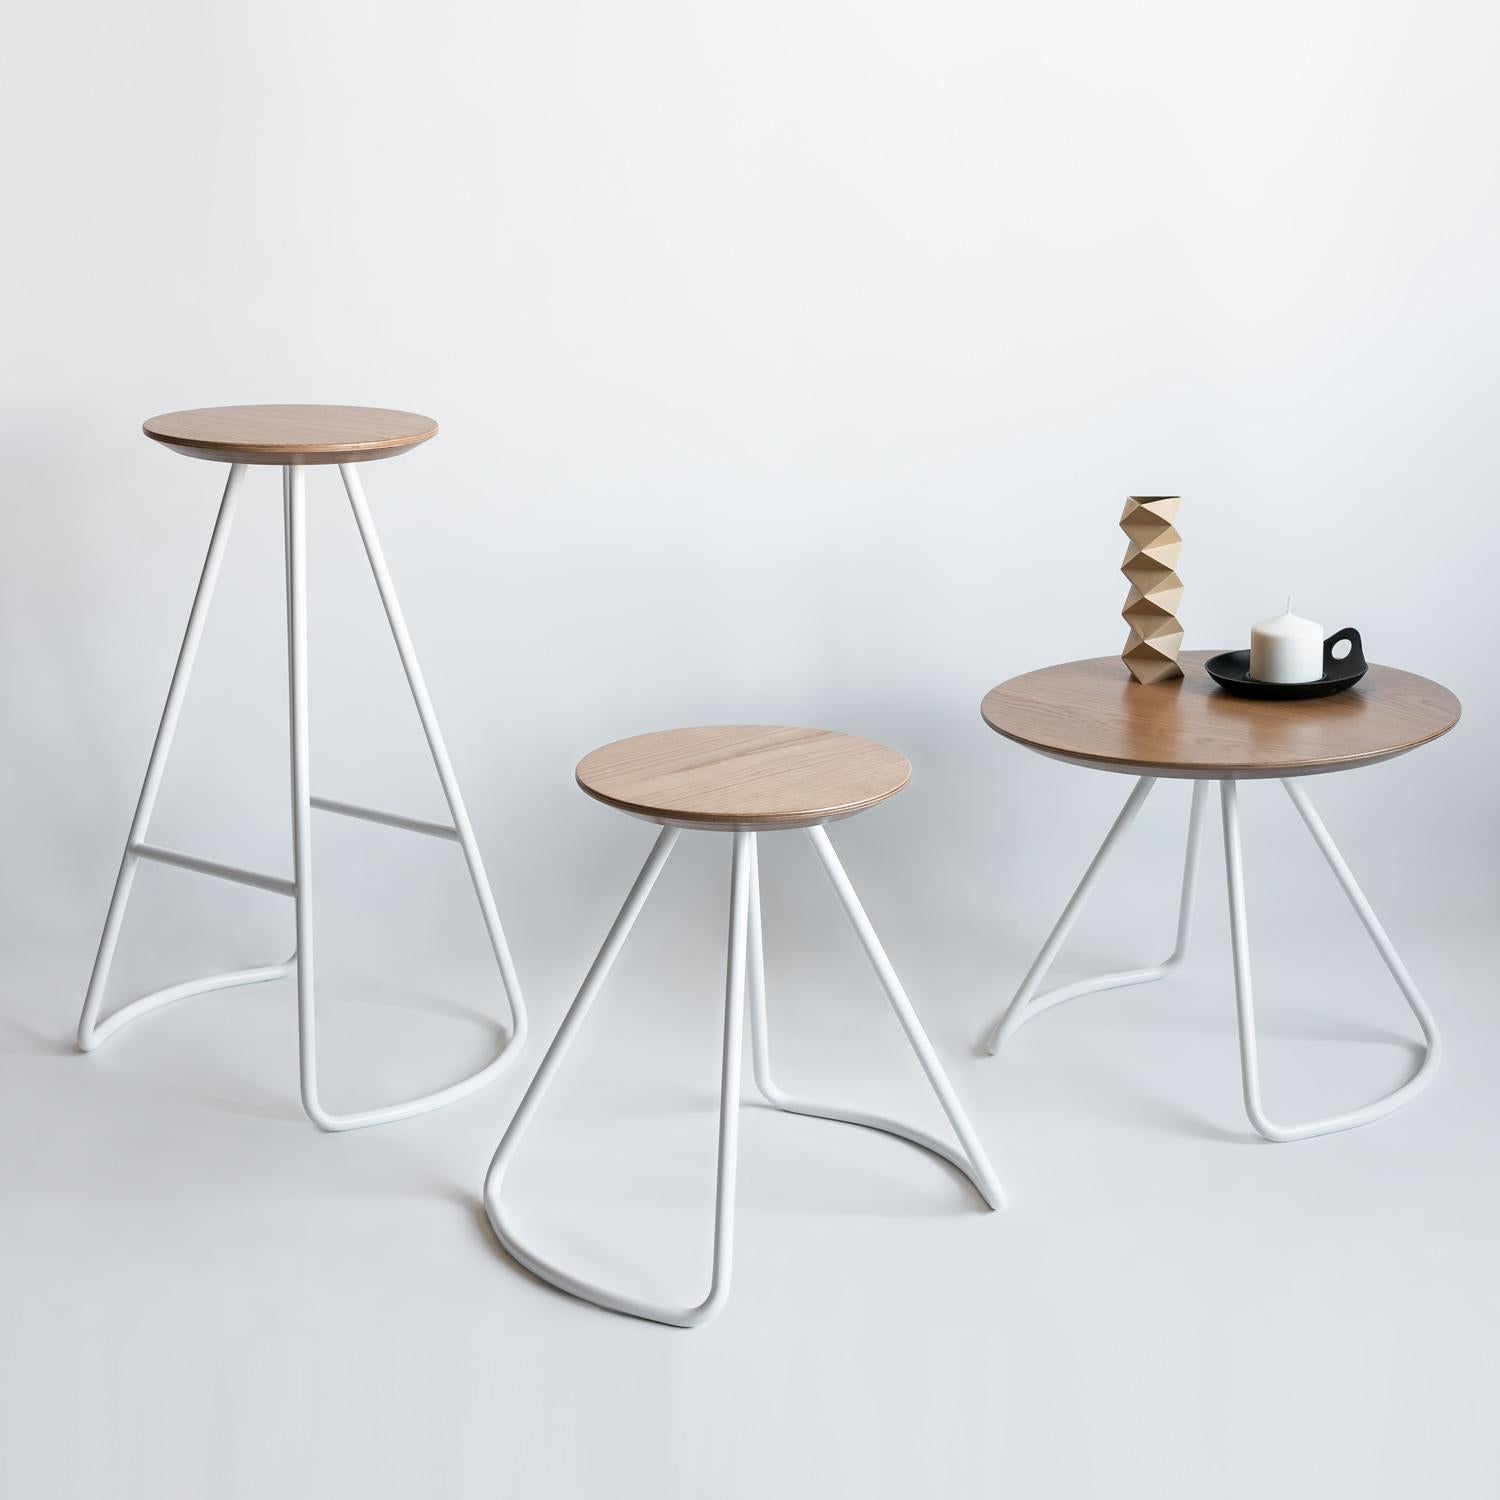 Painted Sama Stool/Table, Contemporary Modern Minimalist Natural Oak & White Metal For Sale